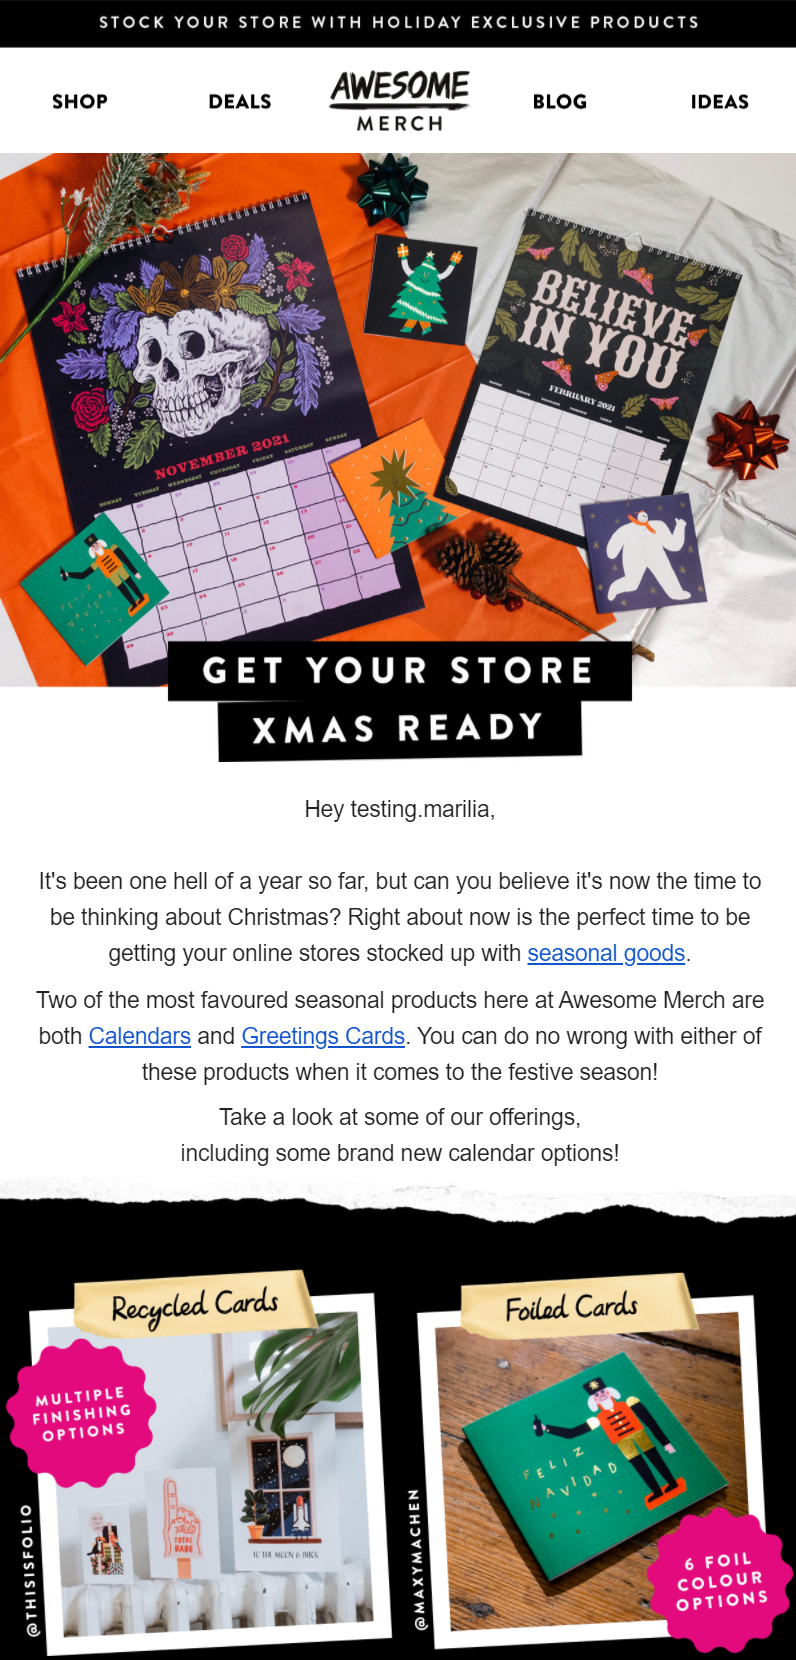 Awesome merch holiday email marketing example 